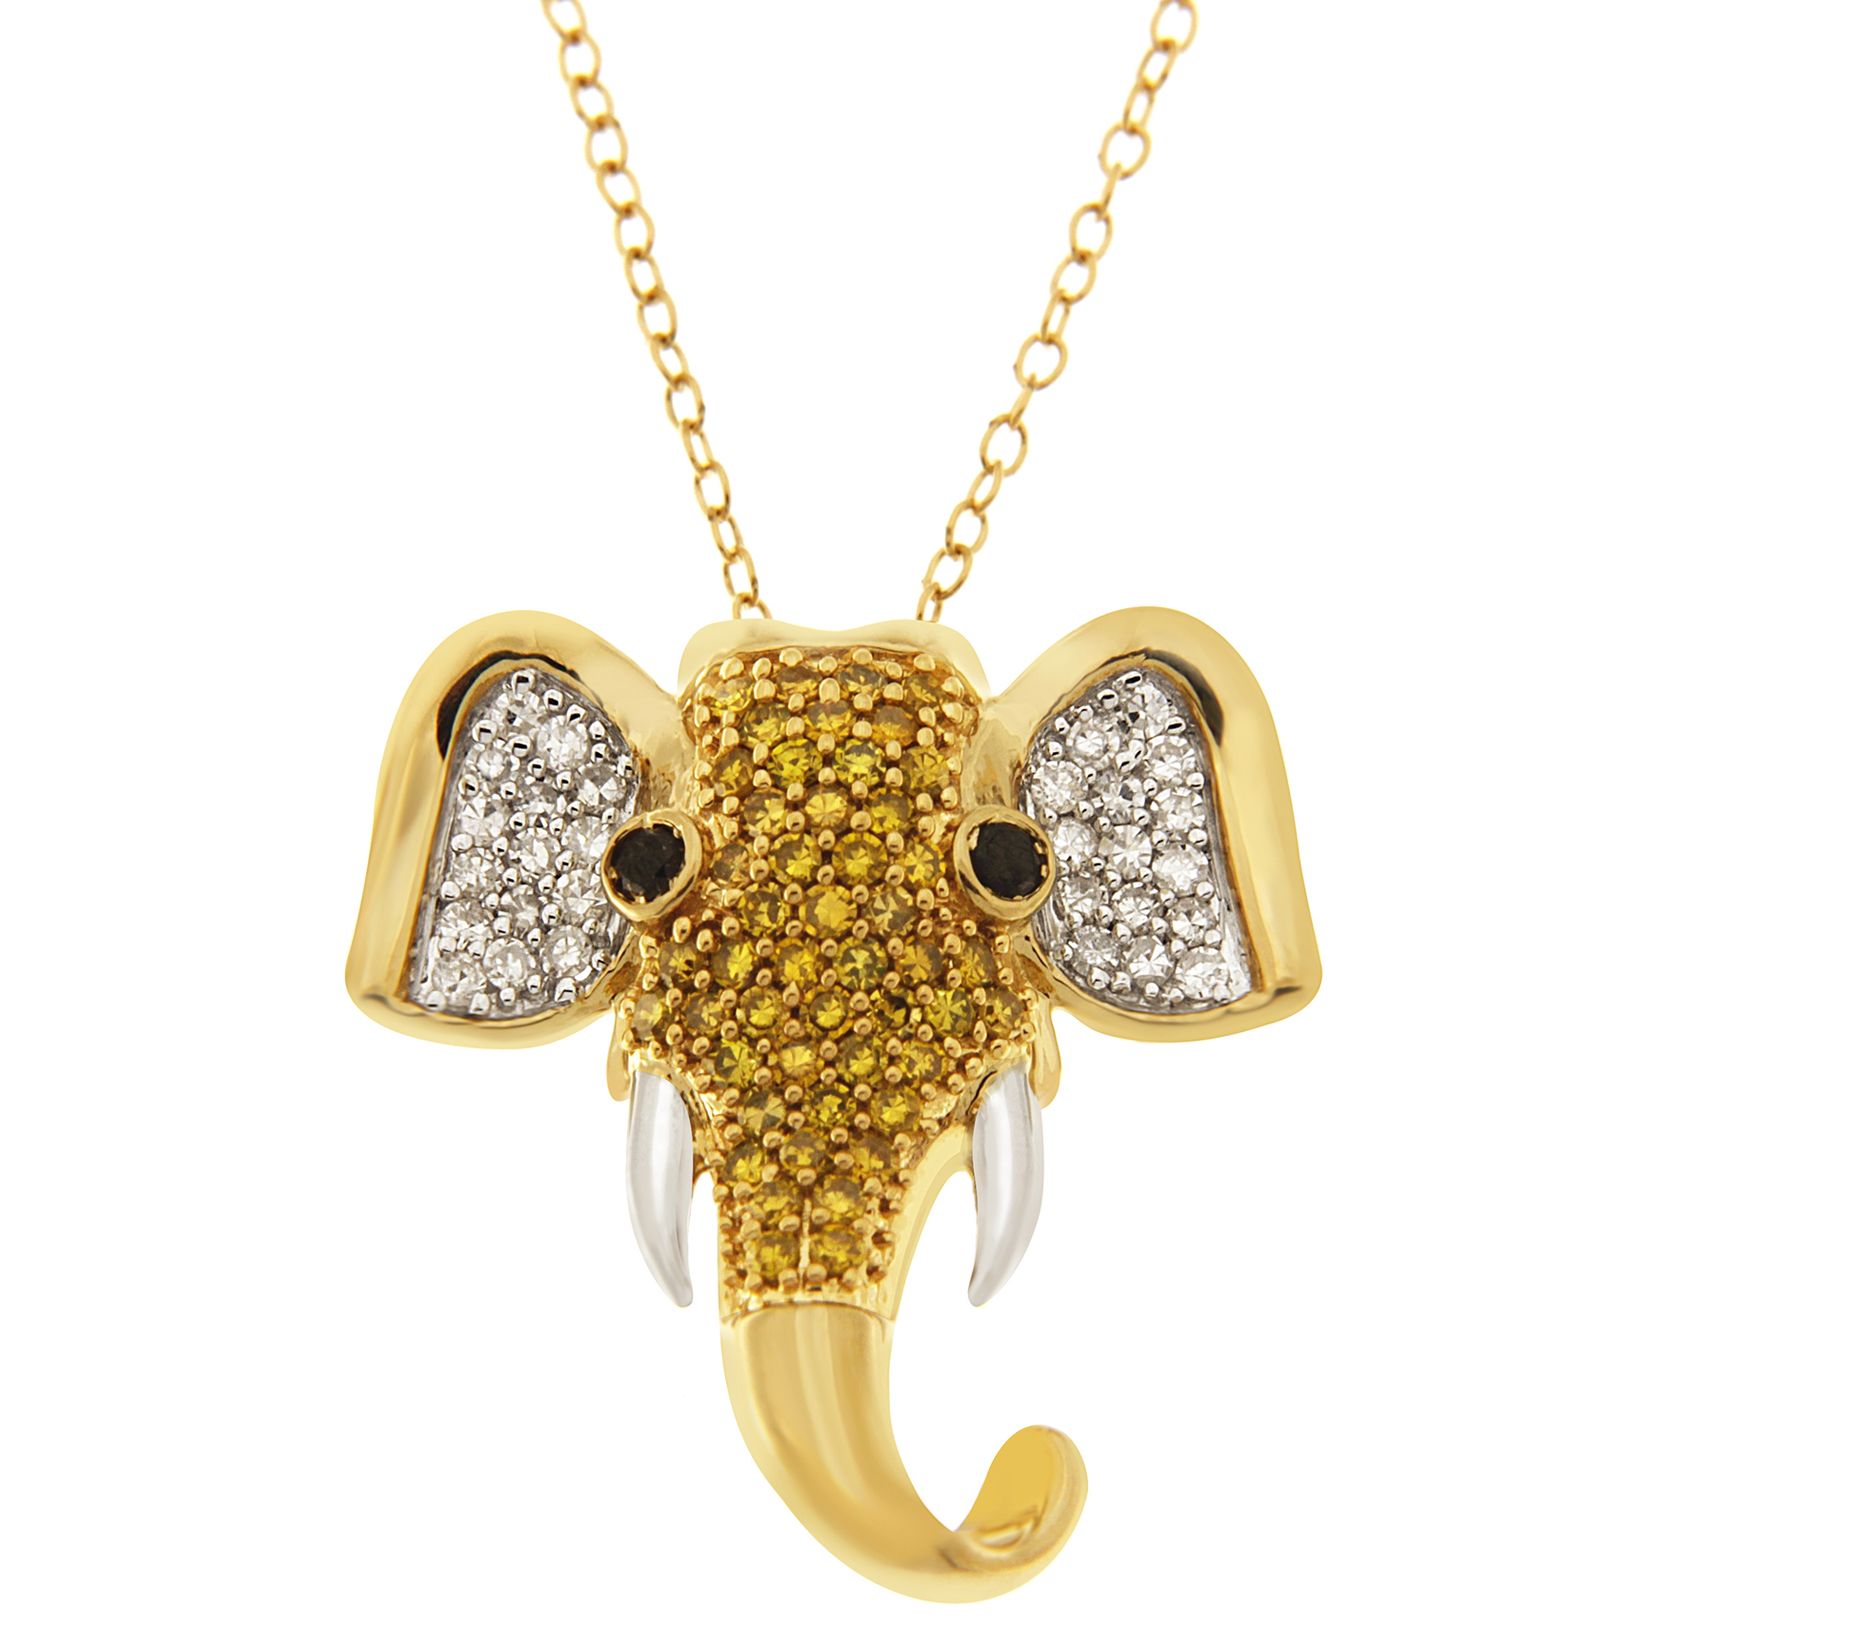 Wishrocks Diamond Accent Circle with Elephant Pendant Necklace in 14K Gold Over Sterling Silver 